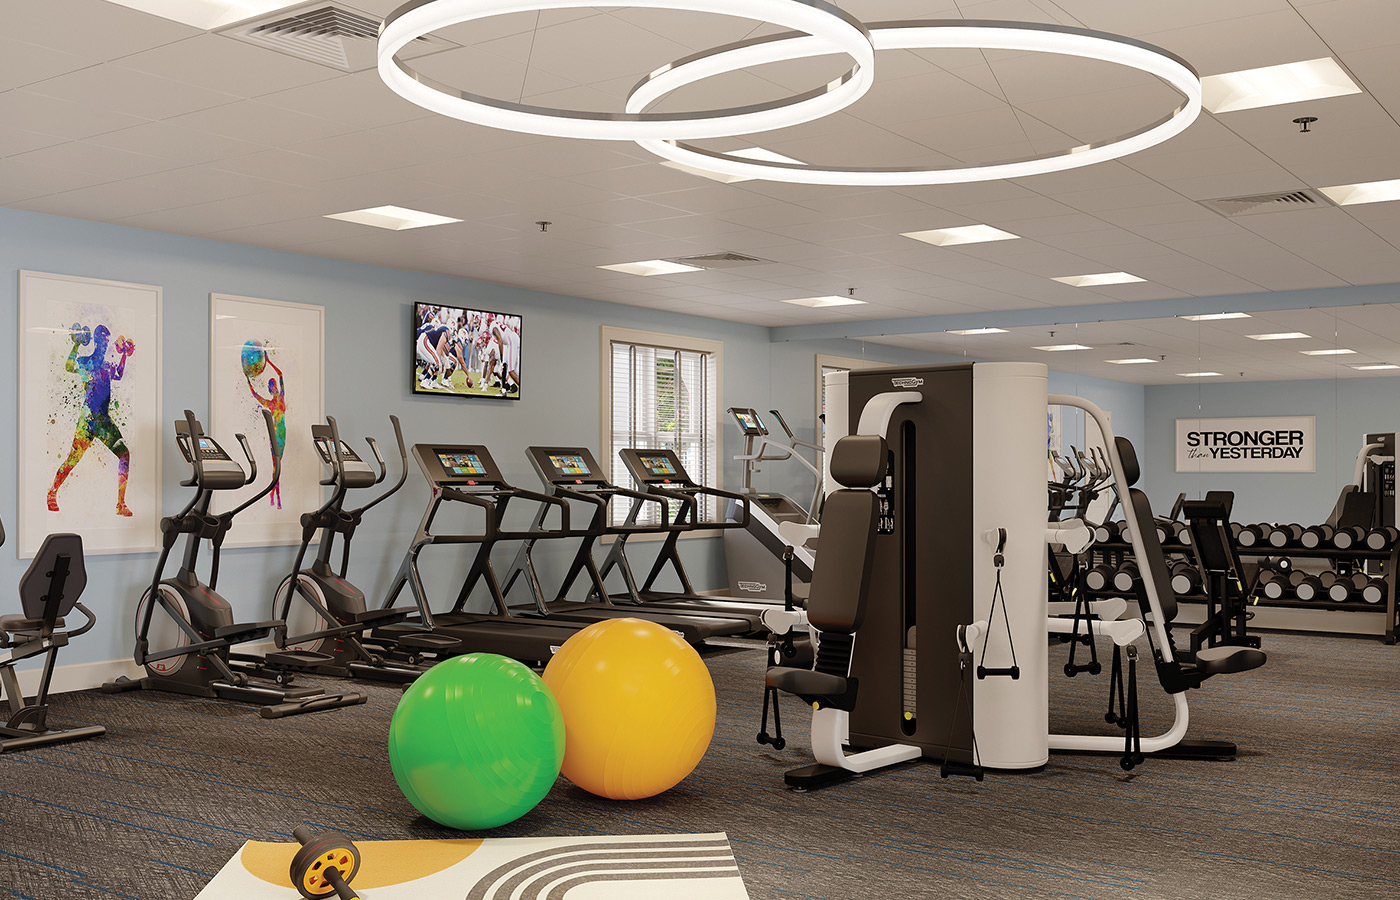 The fitness center at Watersound Fountains.